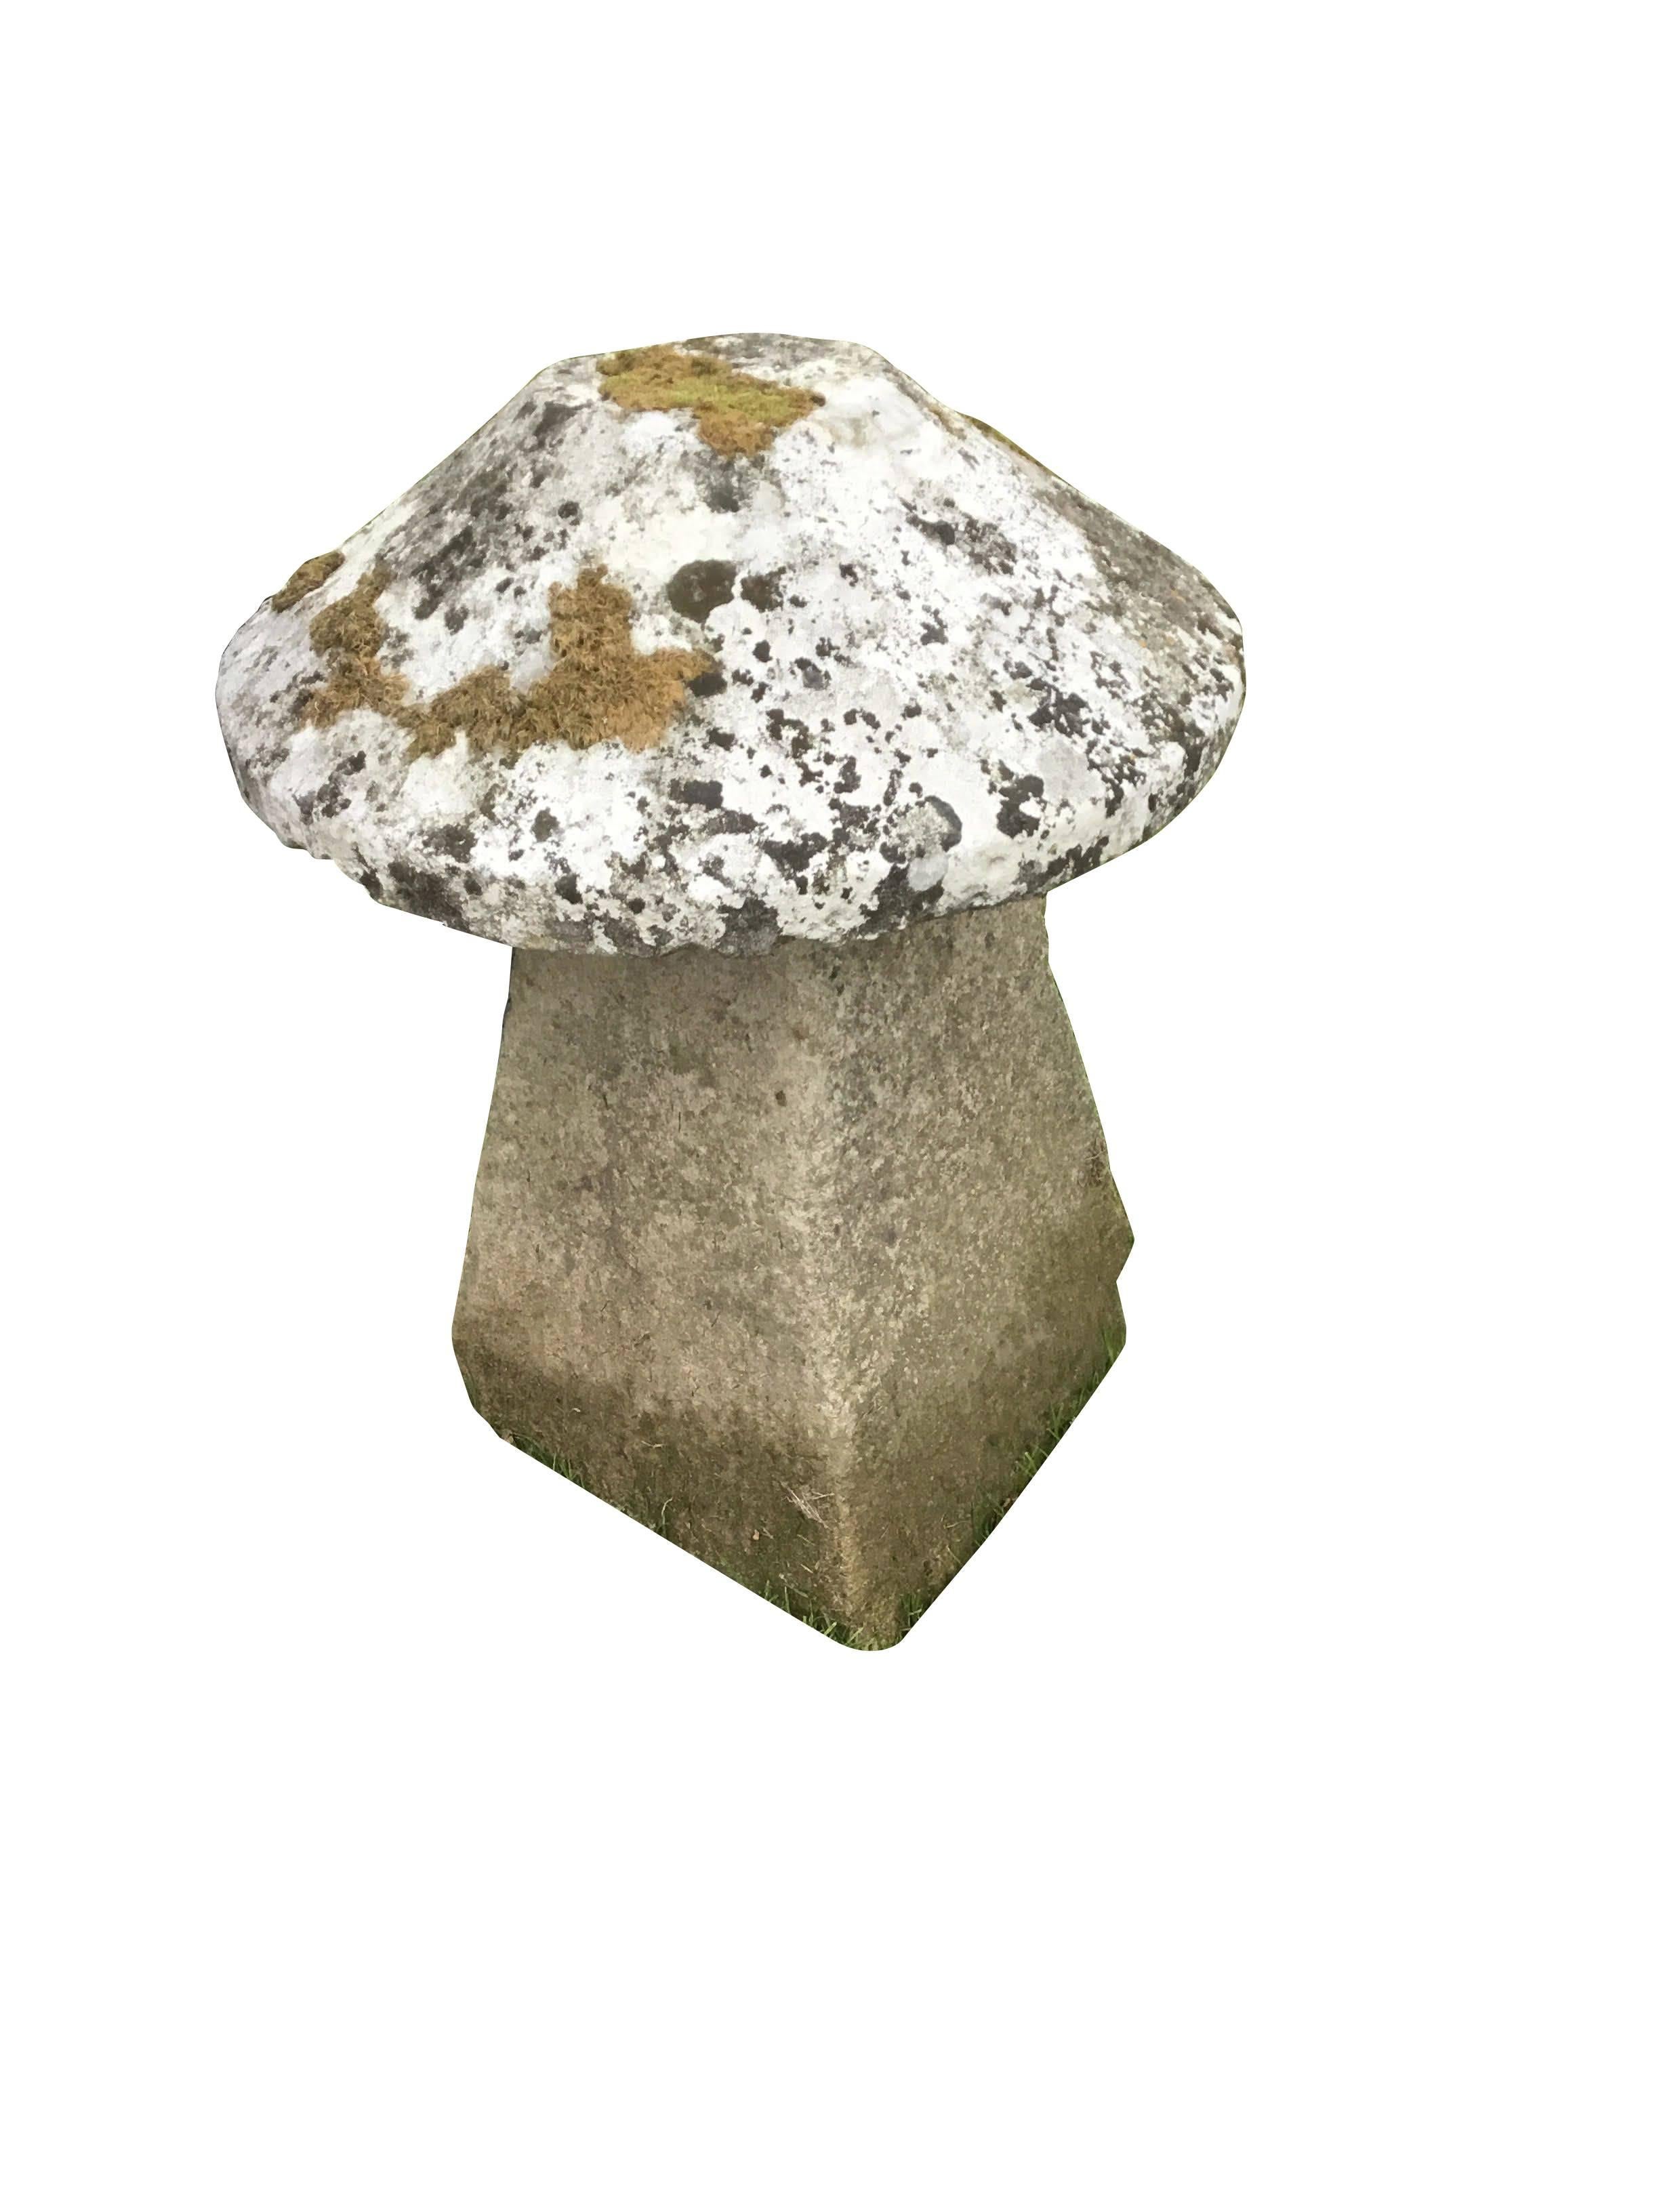 19th century English pair of impressively sized staddle stones from Cornwall.
Oversized mushroom tops with original moss and lichen.
Beautiful natural patina.